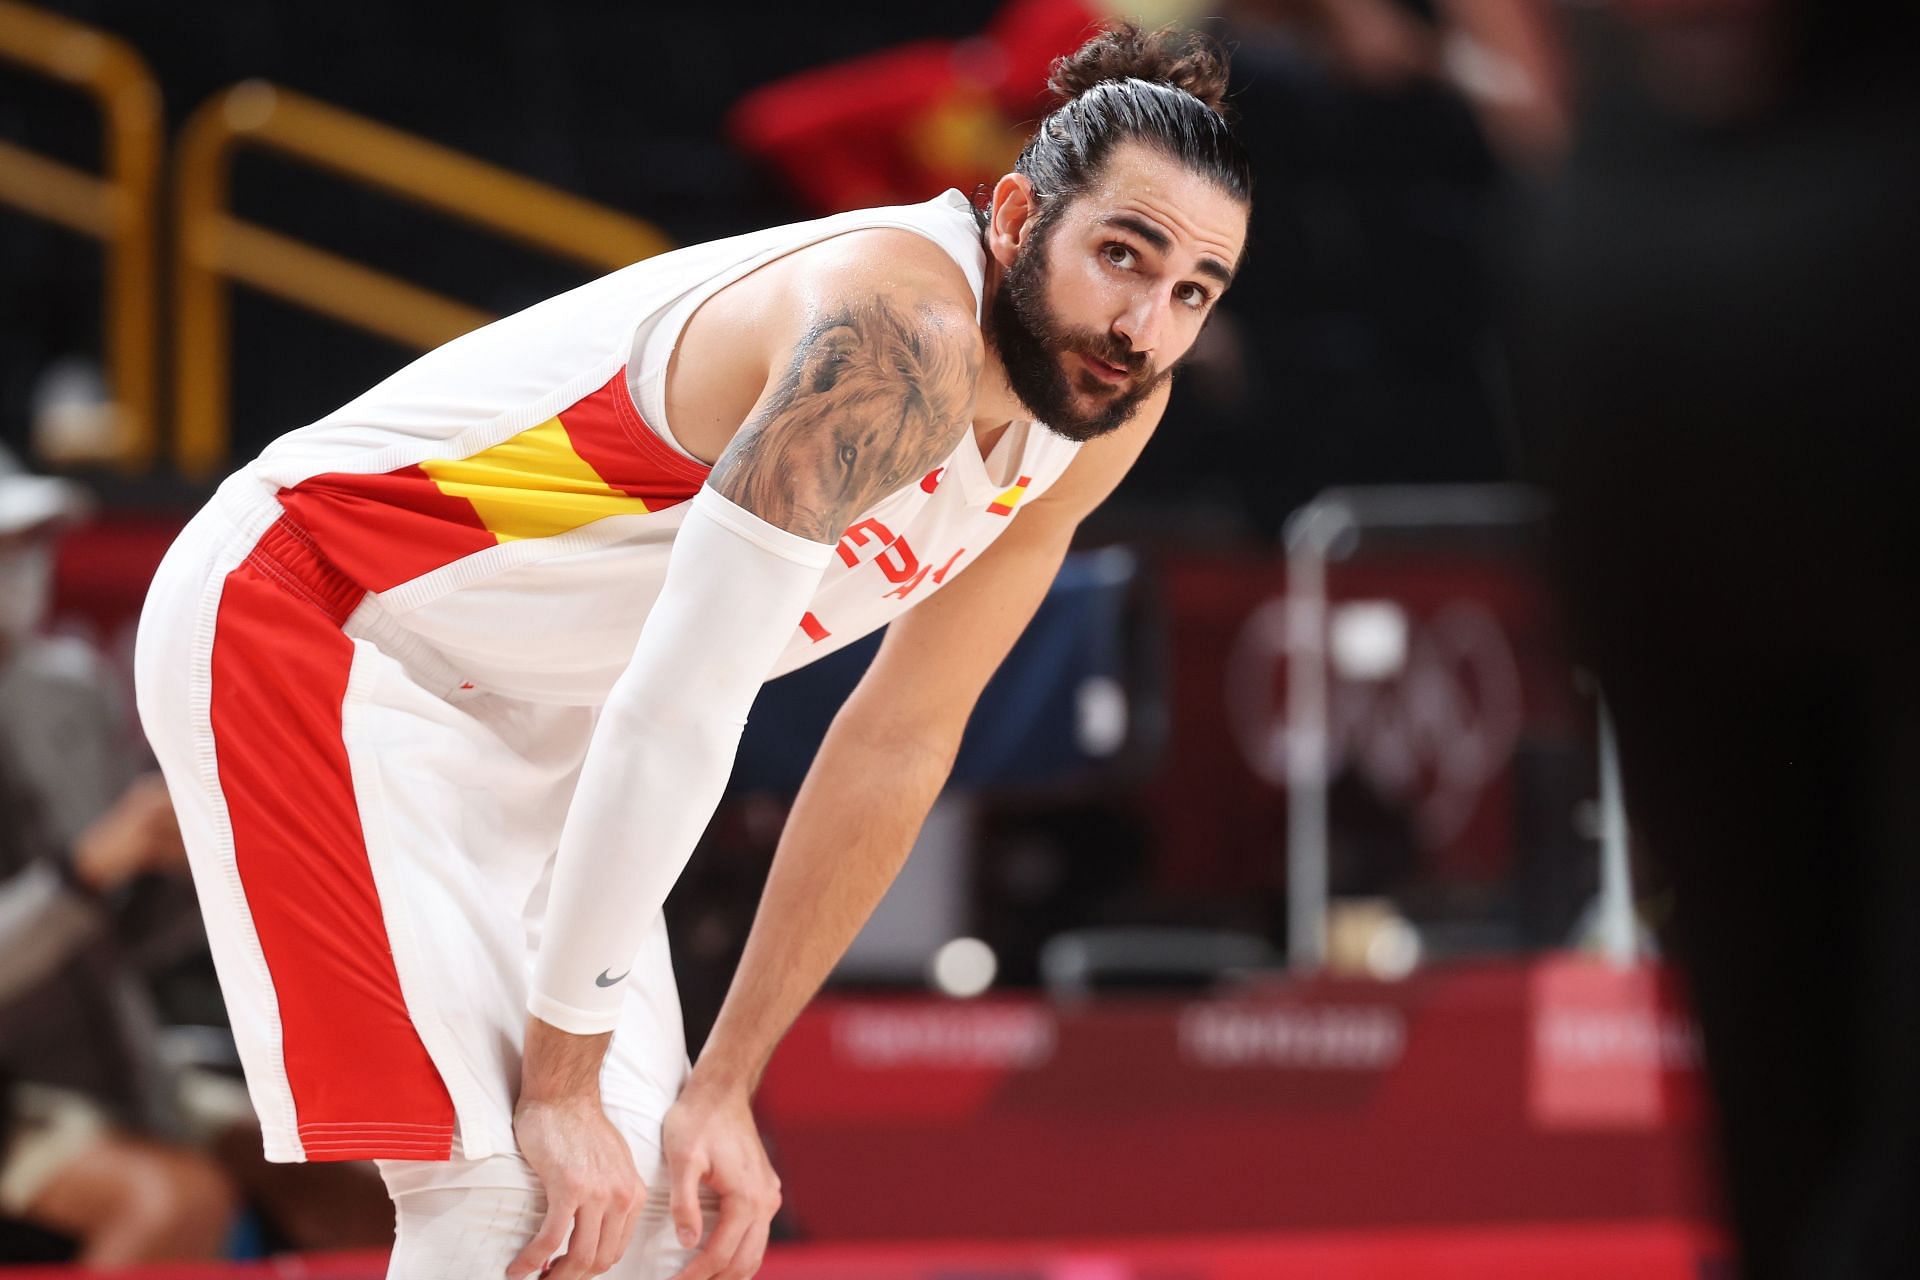 Ricky Rubio representing Spain in the 2020 Tokyo Olympics